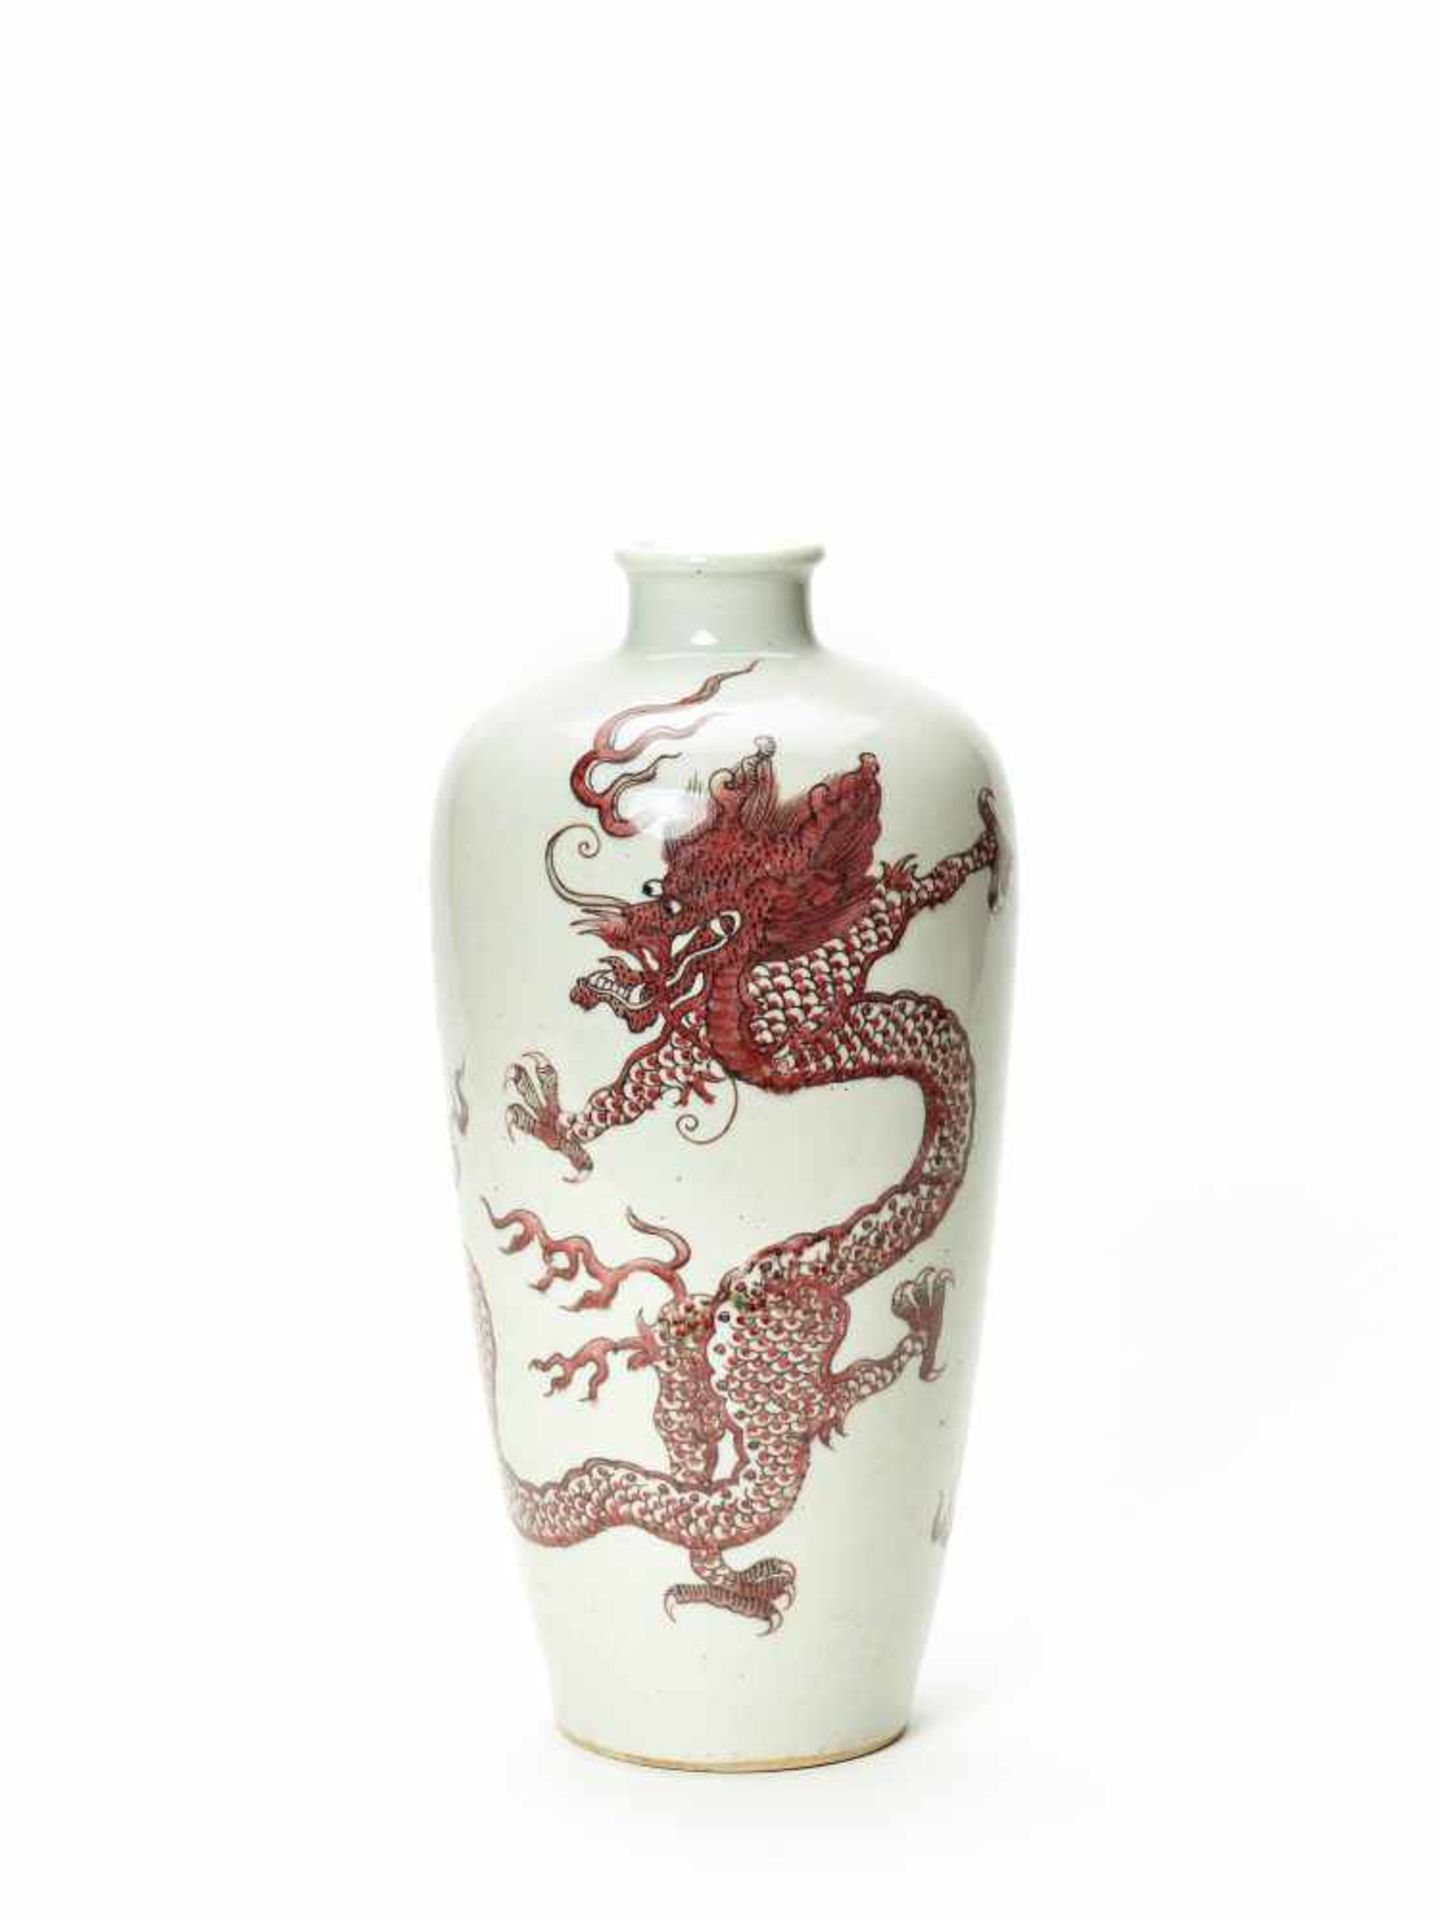 A PORCELAIN MEIPING VASE WITH DRAGON, QING DYNASTYPorcelainChina, Qing dynastyThe porcelain ‘